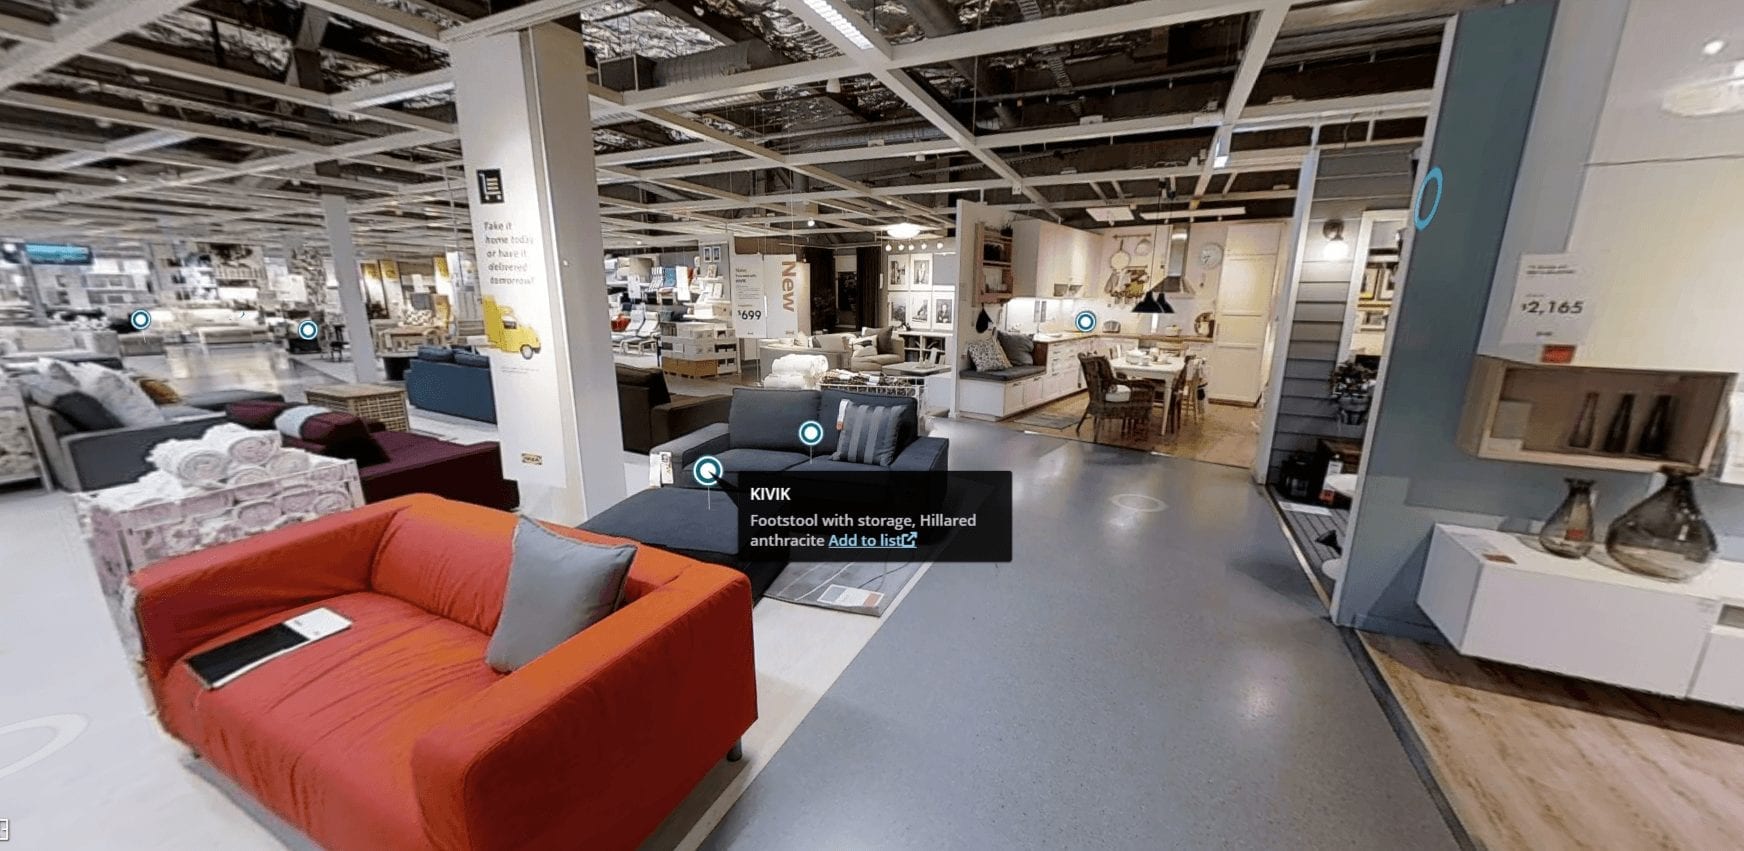 IKEA using VR is business